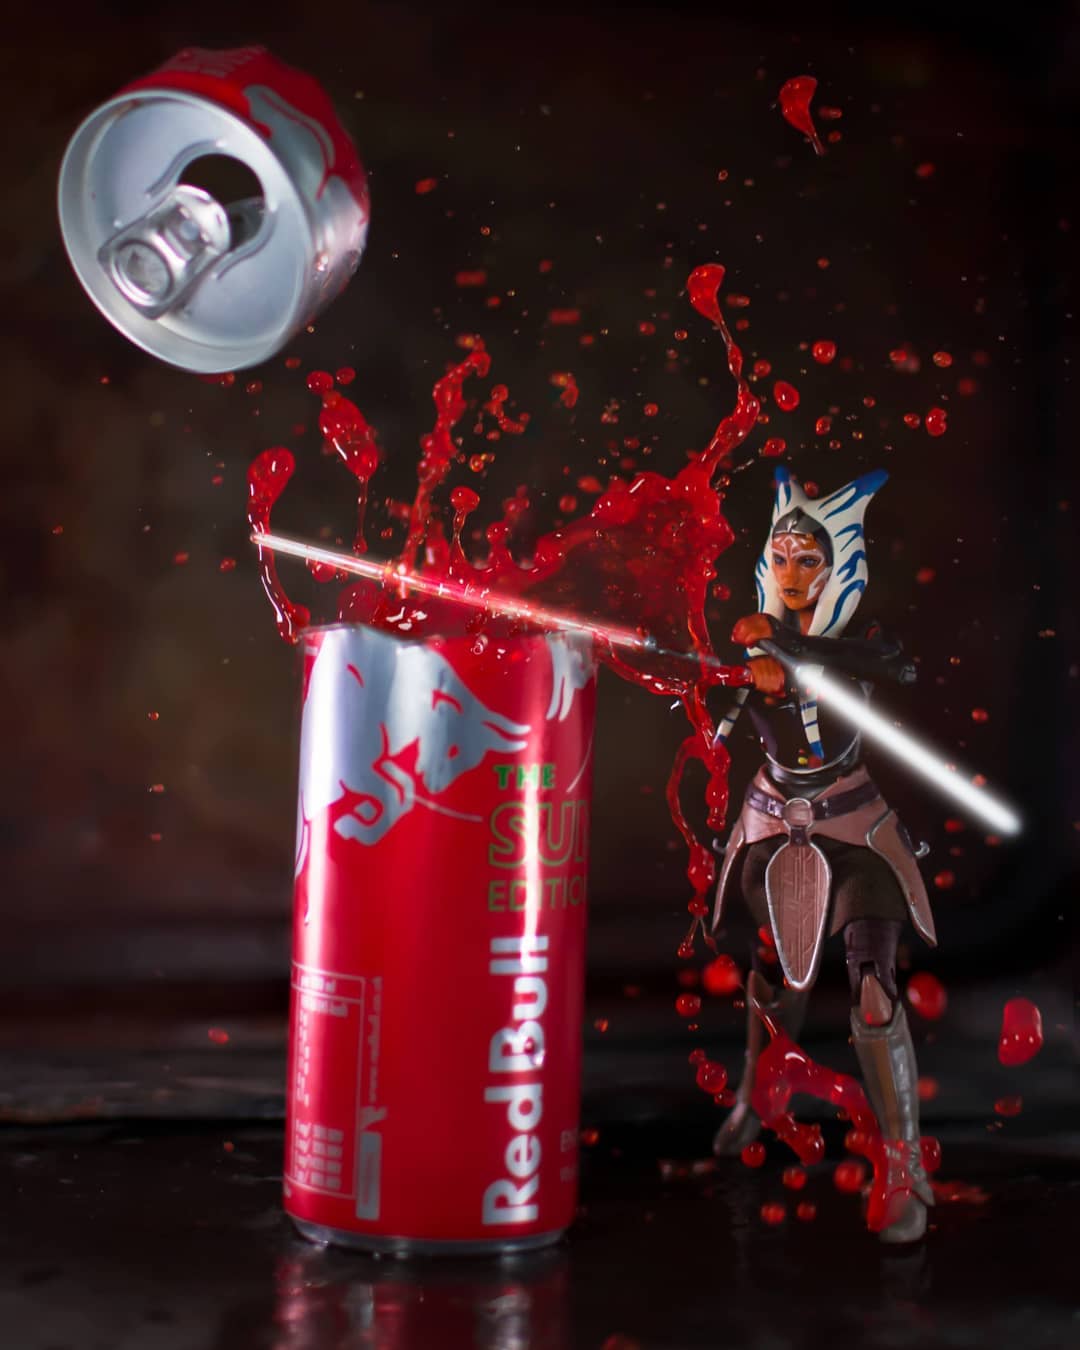 Action Shots Of Pop Culture Characters With Drinks By Andrea (2)